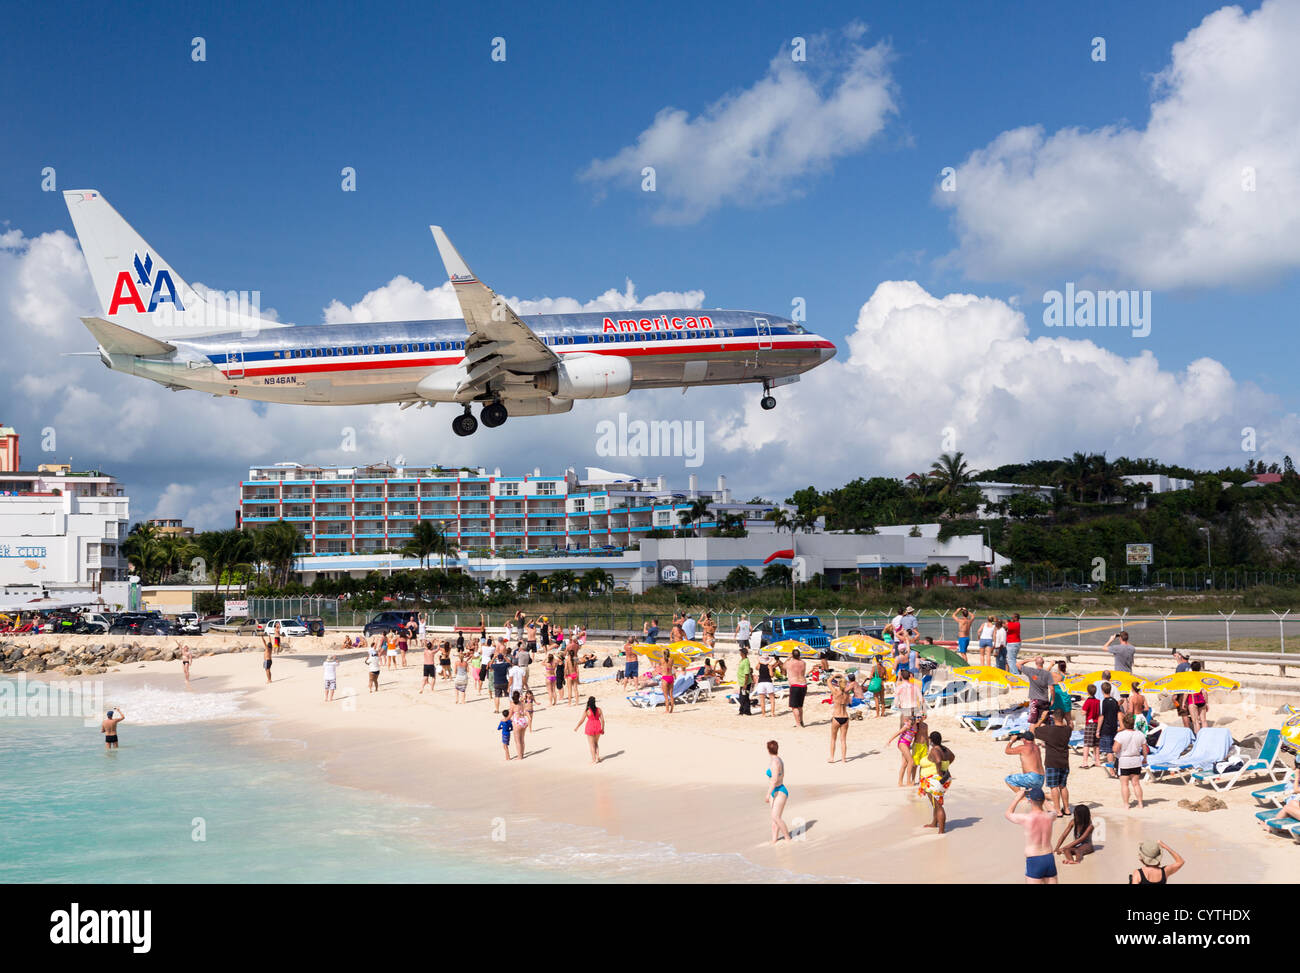 American Airlines Boeing 737 flight lands over Maho beach on November 1, 2012. The 2300m runway is approached over the sea. Stock Photo